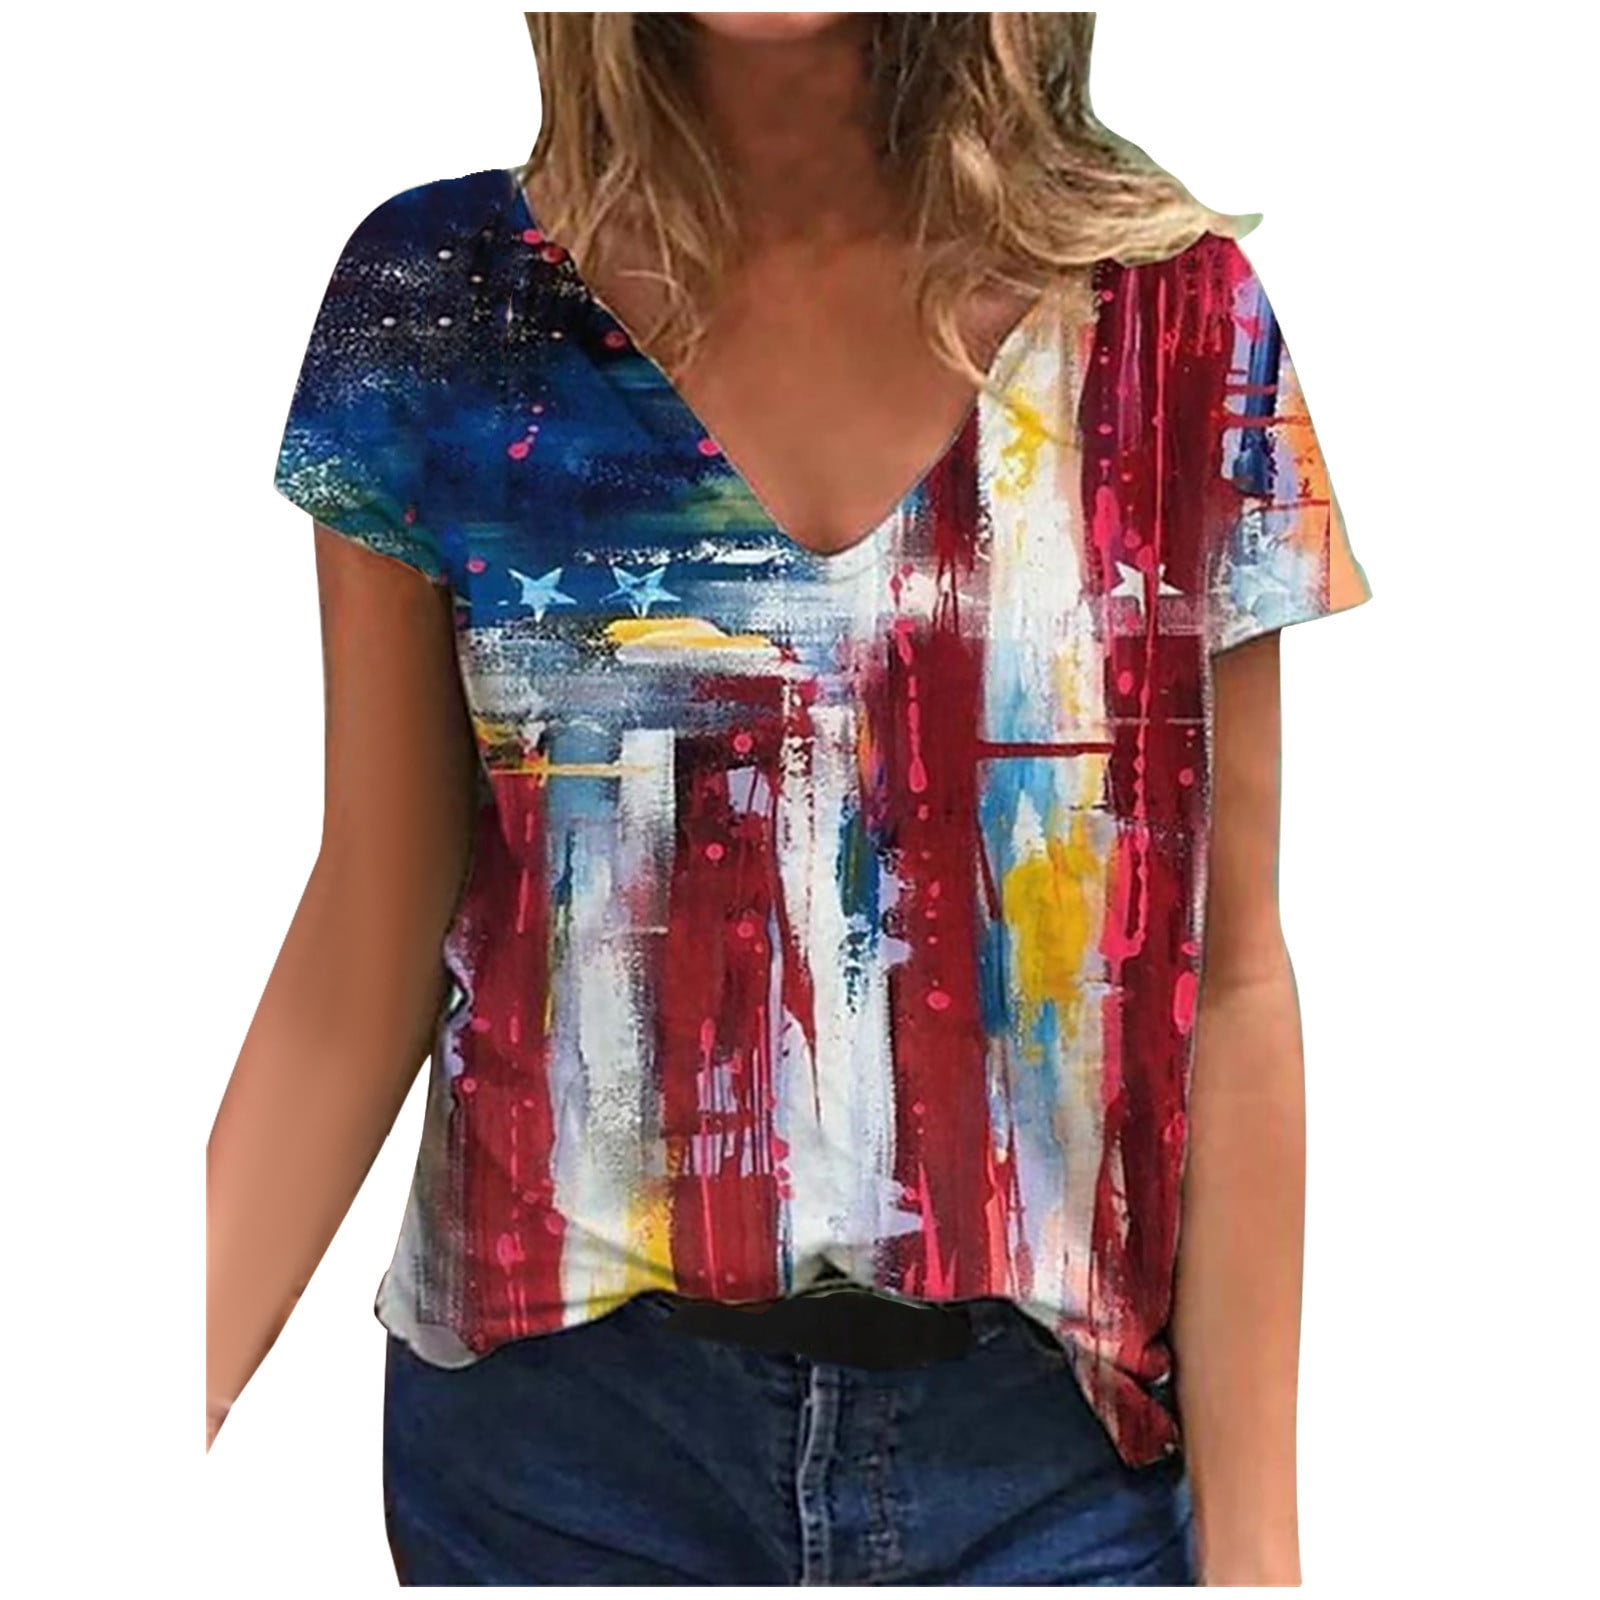 Bidobibo Womens Floral Print Summer Tops for Women Casual Loose Crew Neck T Shirts Short Sleeve Colorful Blouses